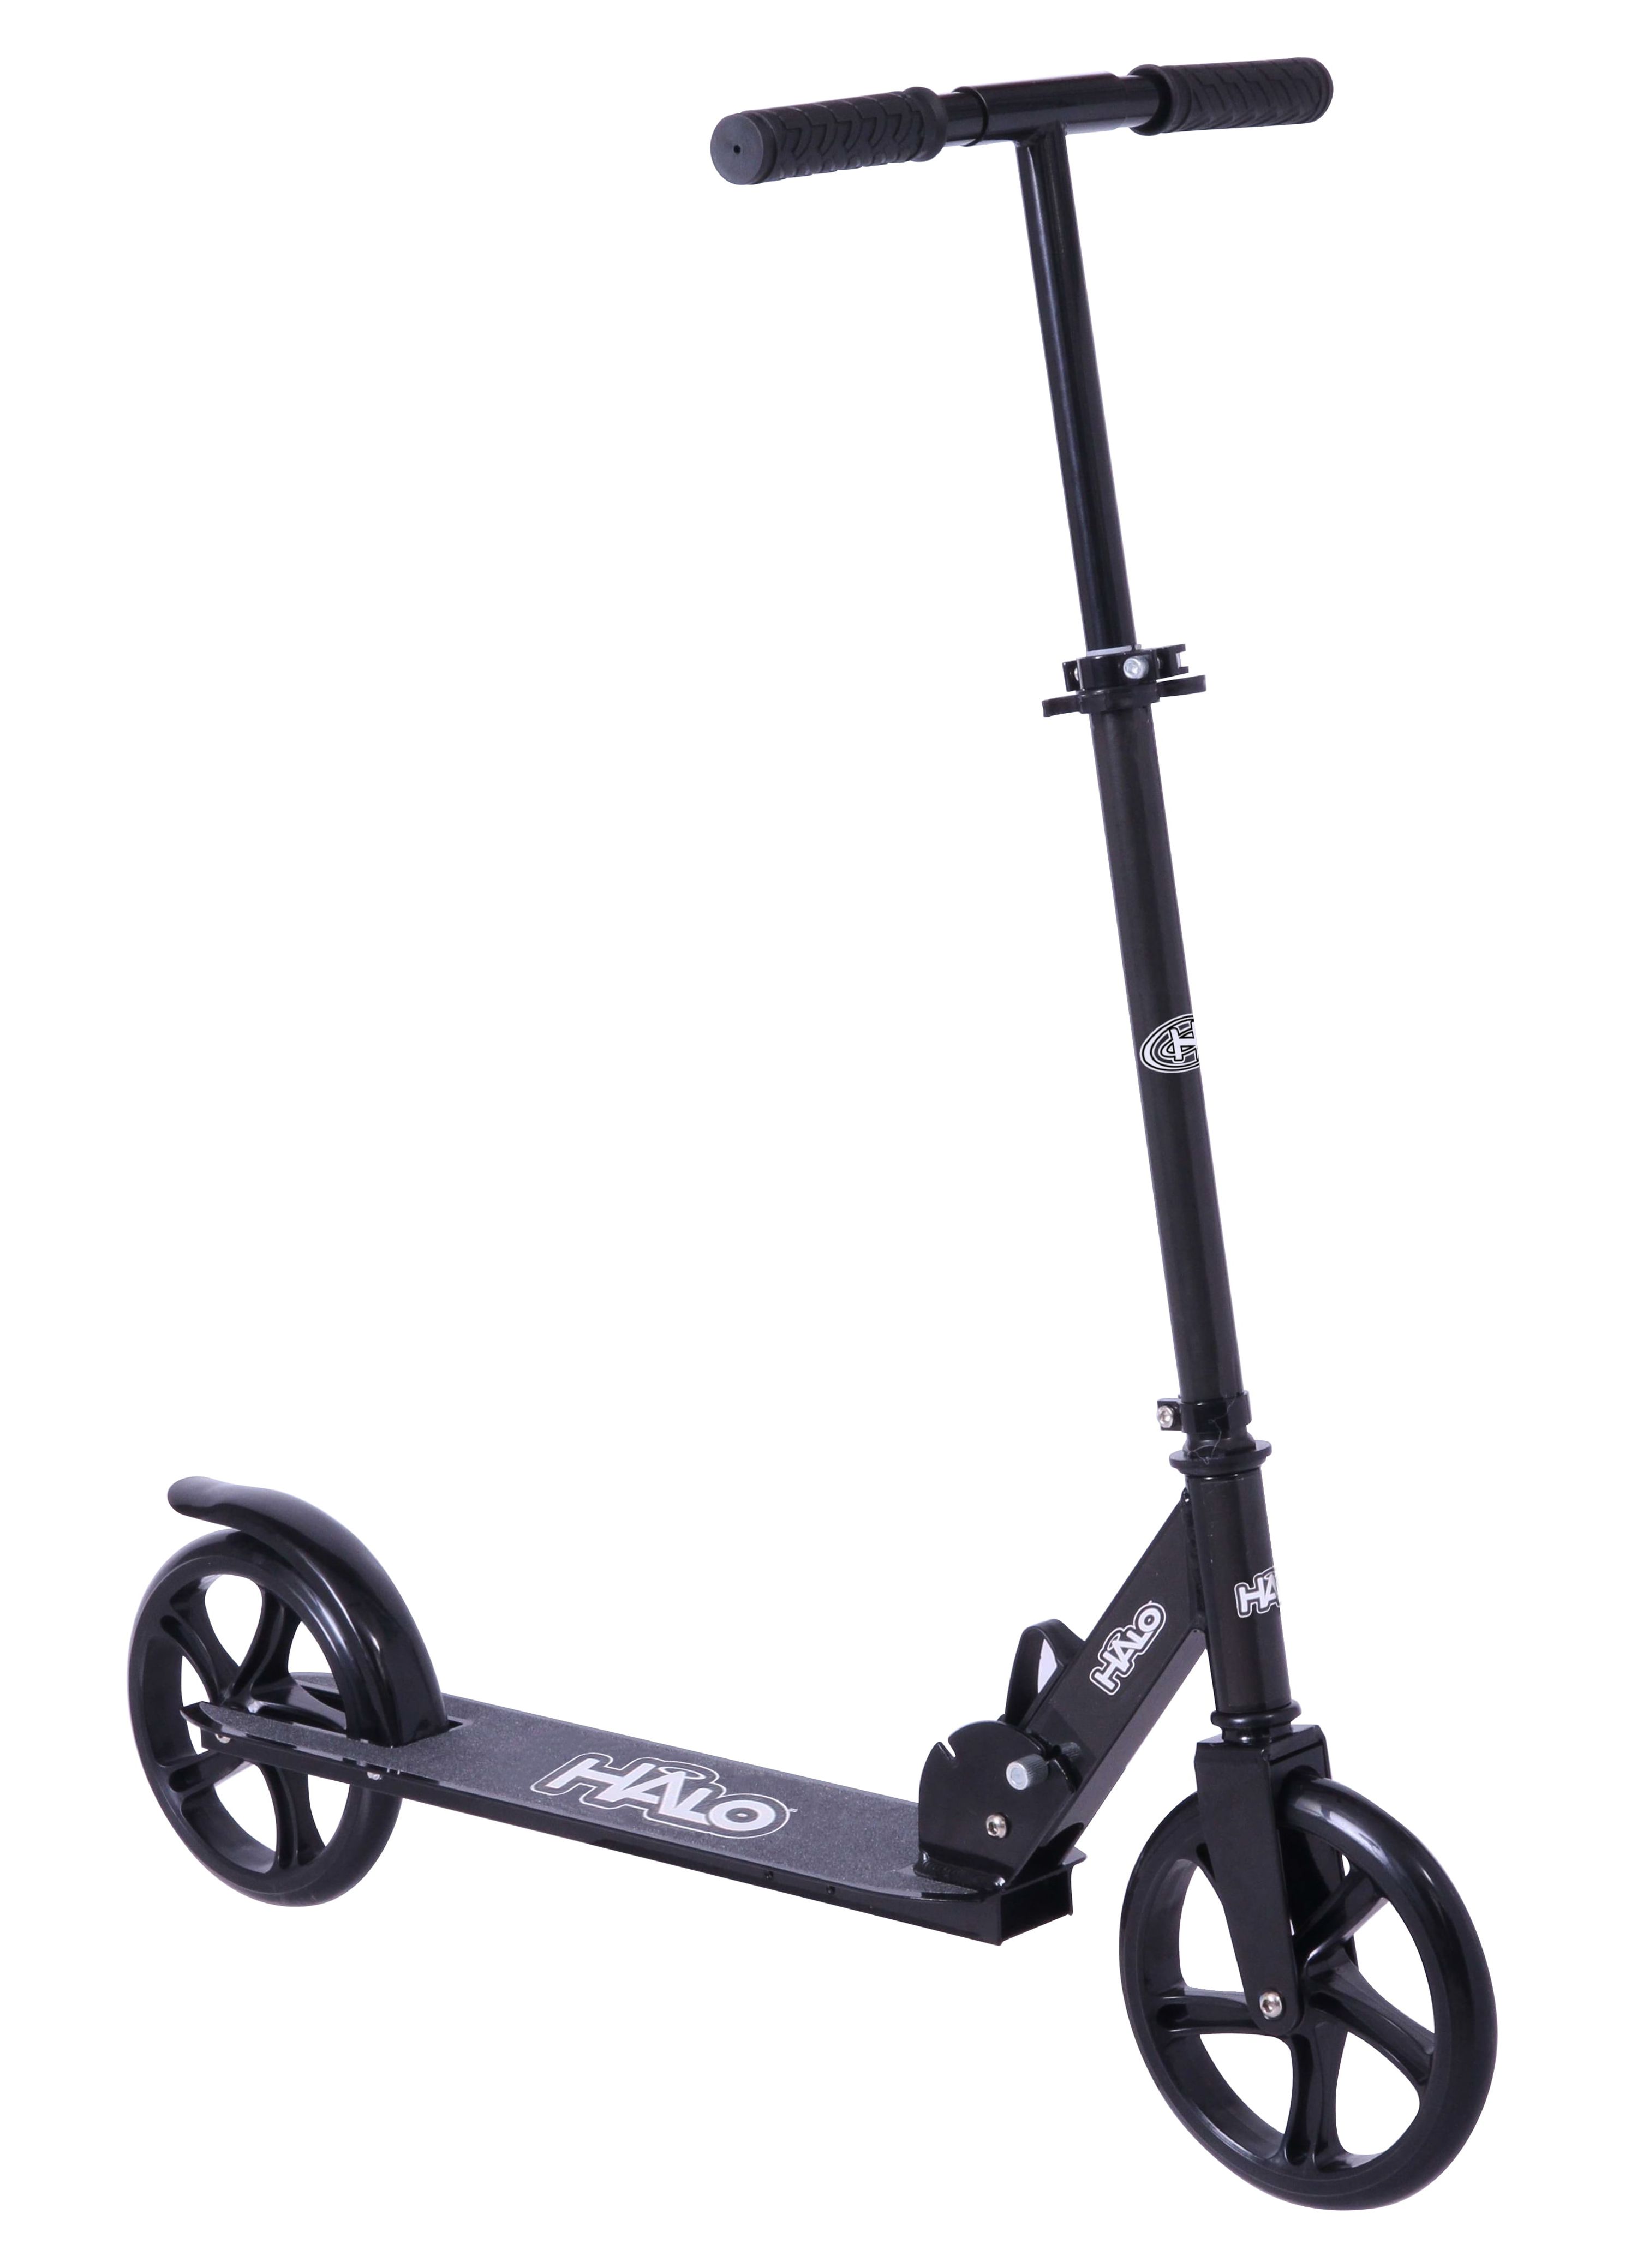 HALO Rise Above Supreme Big Wheel (8") Scooters - For Adults and Kids - Unisex - Commuting Made Easy - image 1 of 14